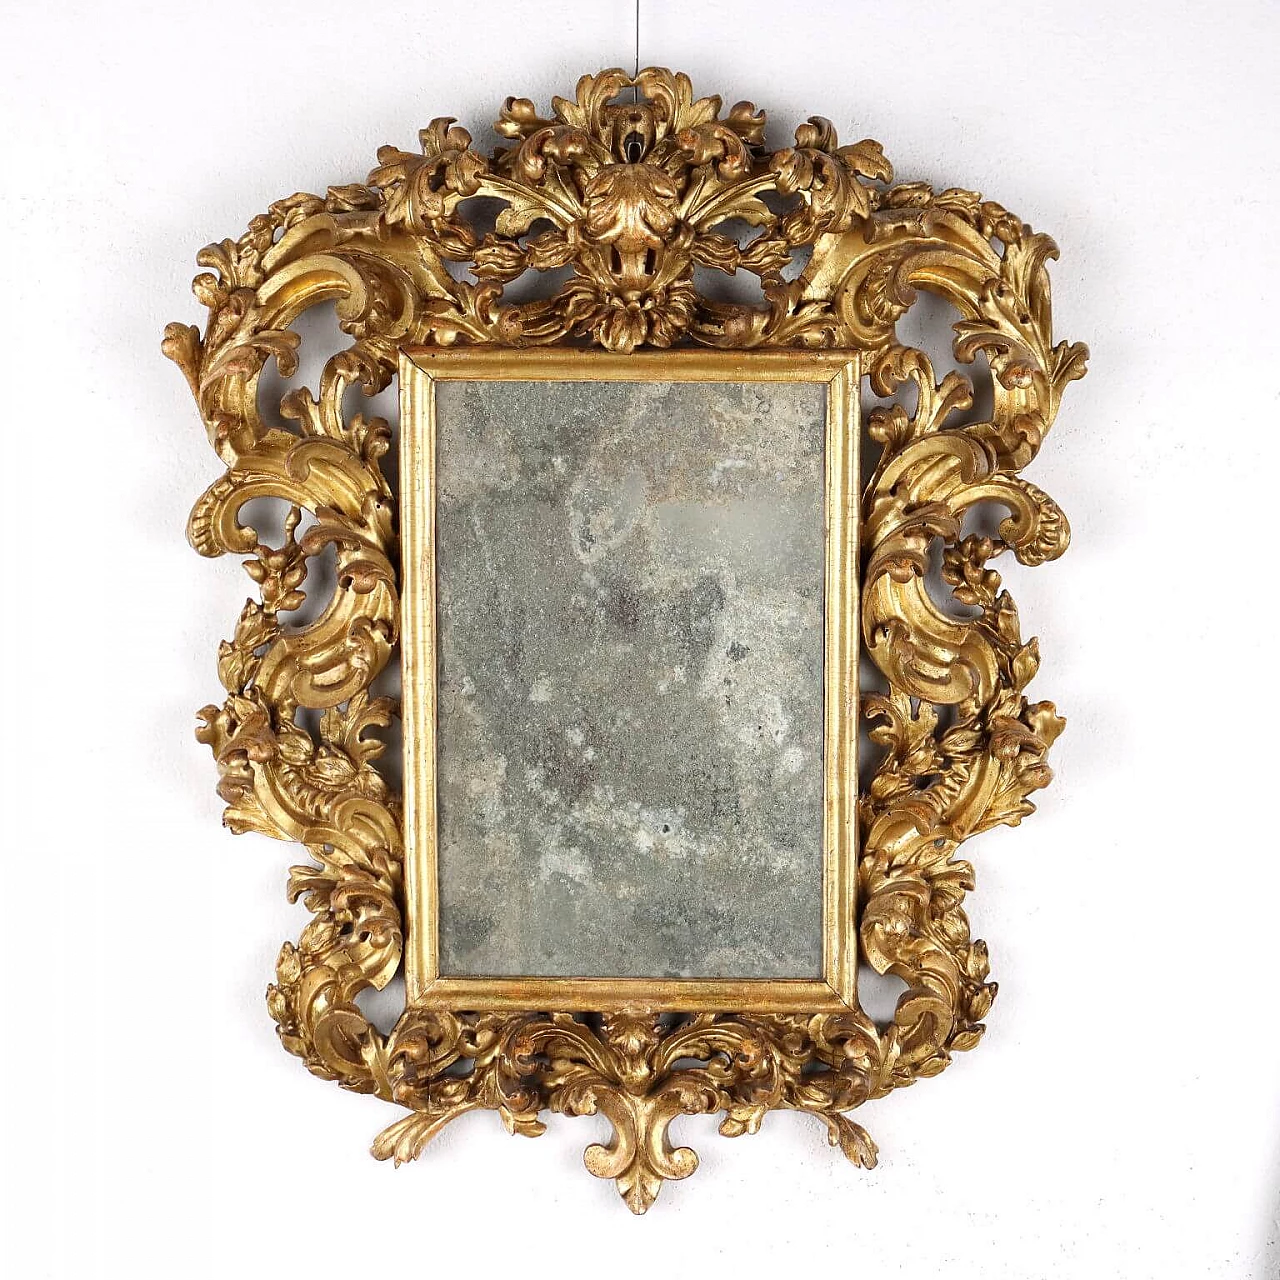 Baroque mirror with acanthus leaves, 18th century 1